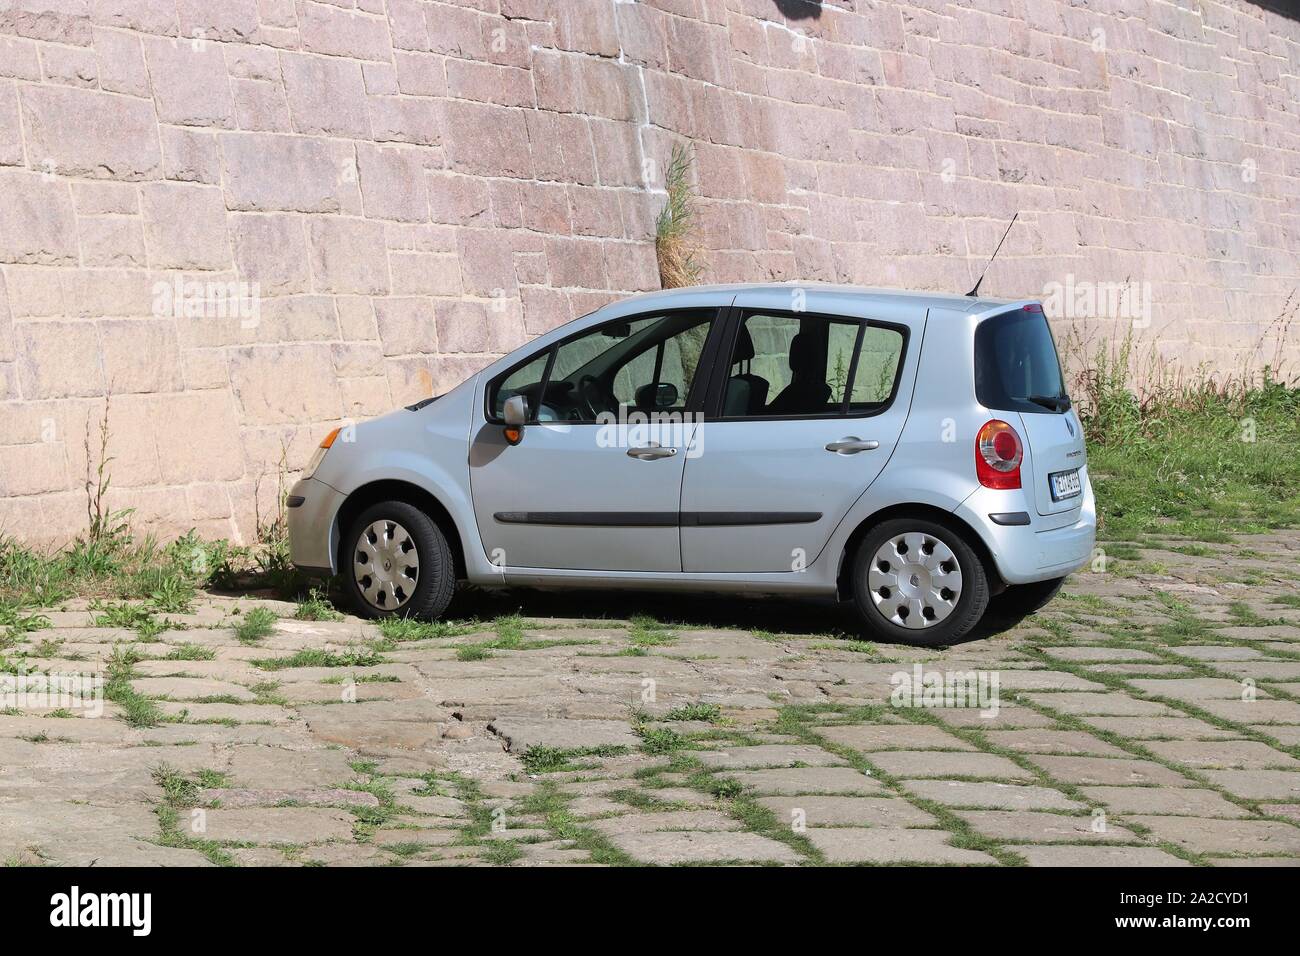 MEISSEN, GERMANY - MAY 5, 2018: Renault Modus compact mini-MPV car parked in Germany. There were 45.8 million cars registered in Germany (as of 2017). Stock Photo